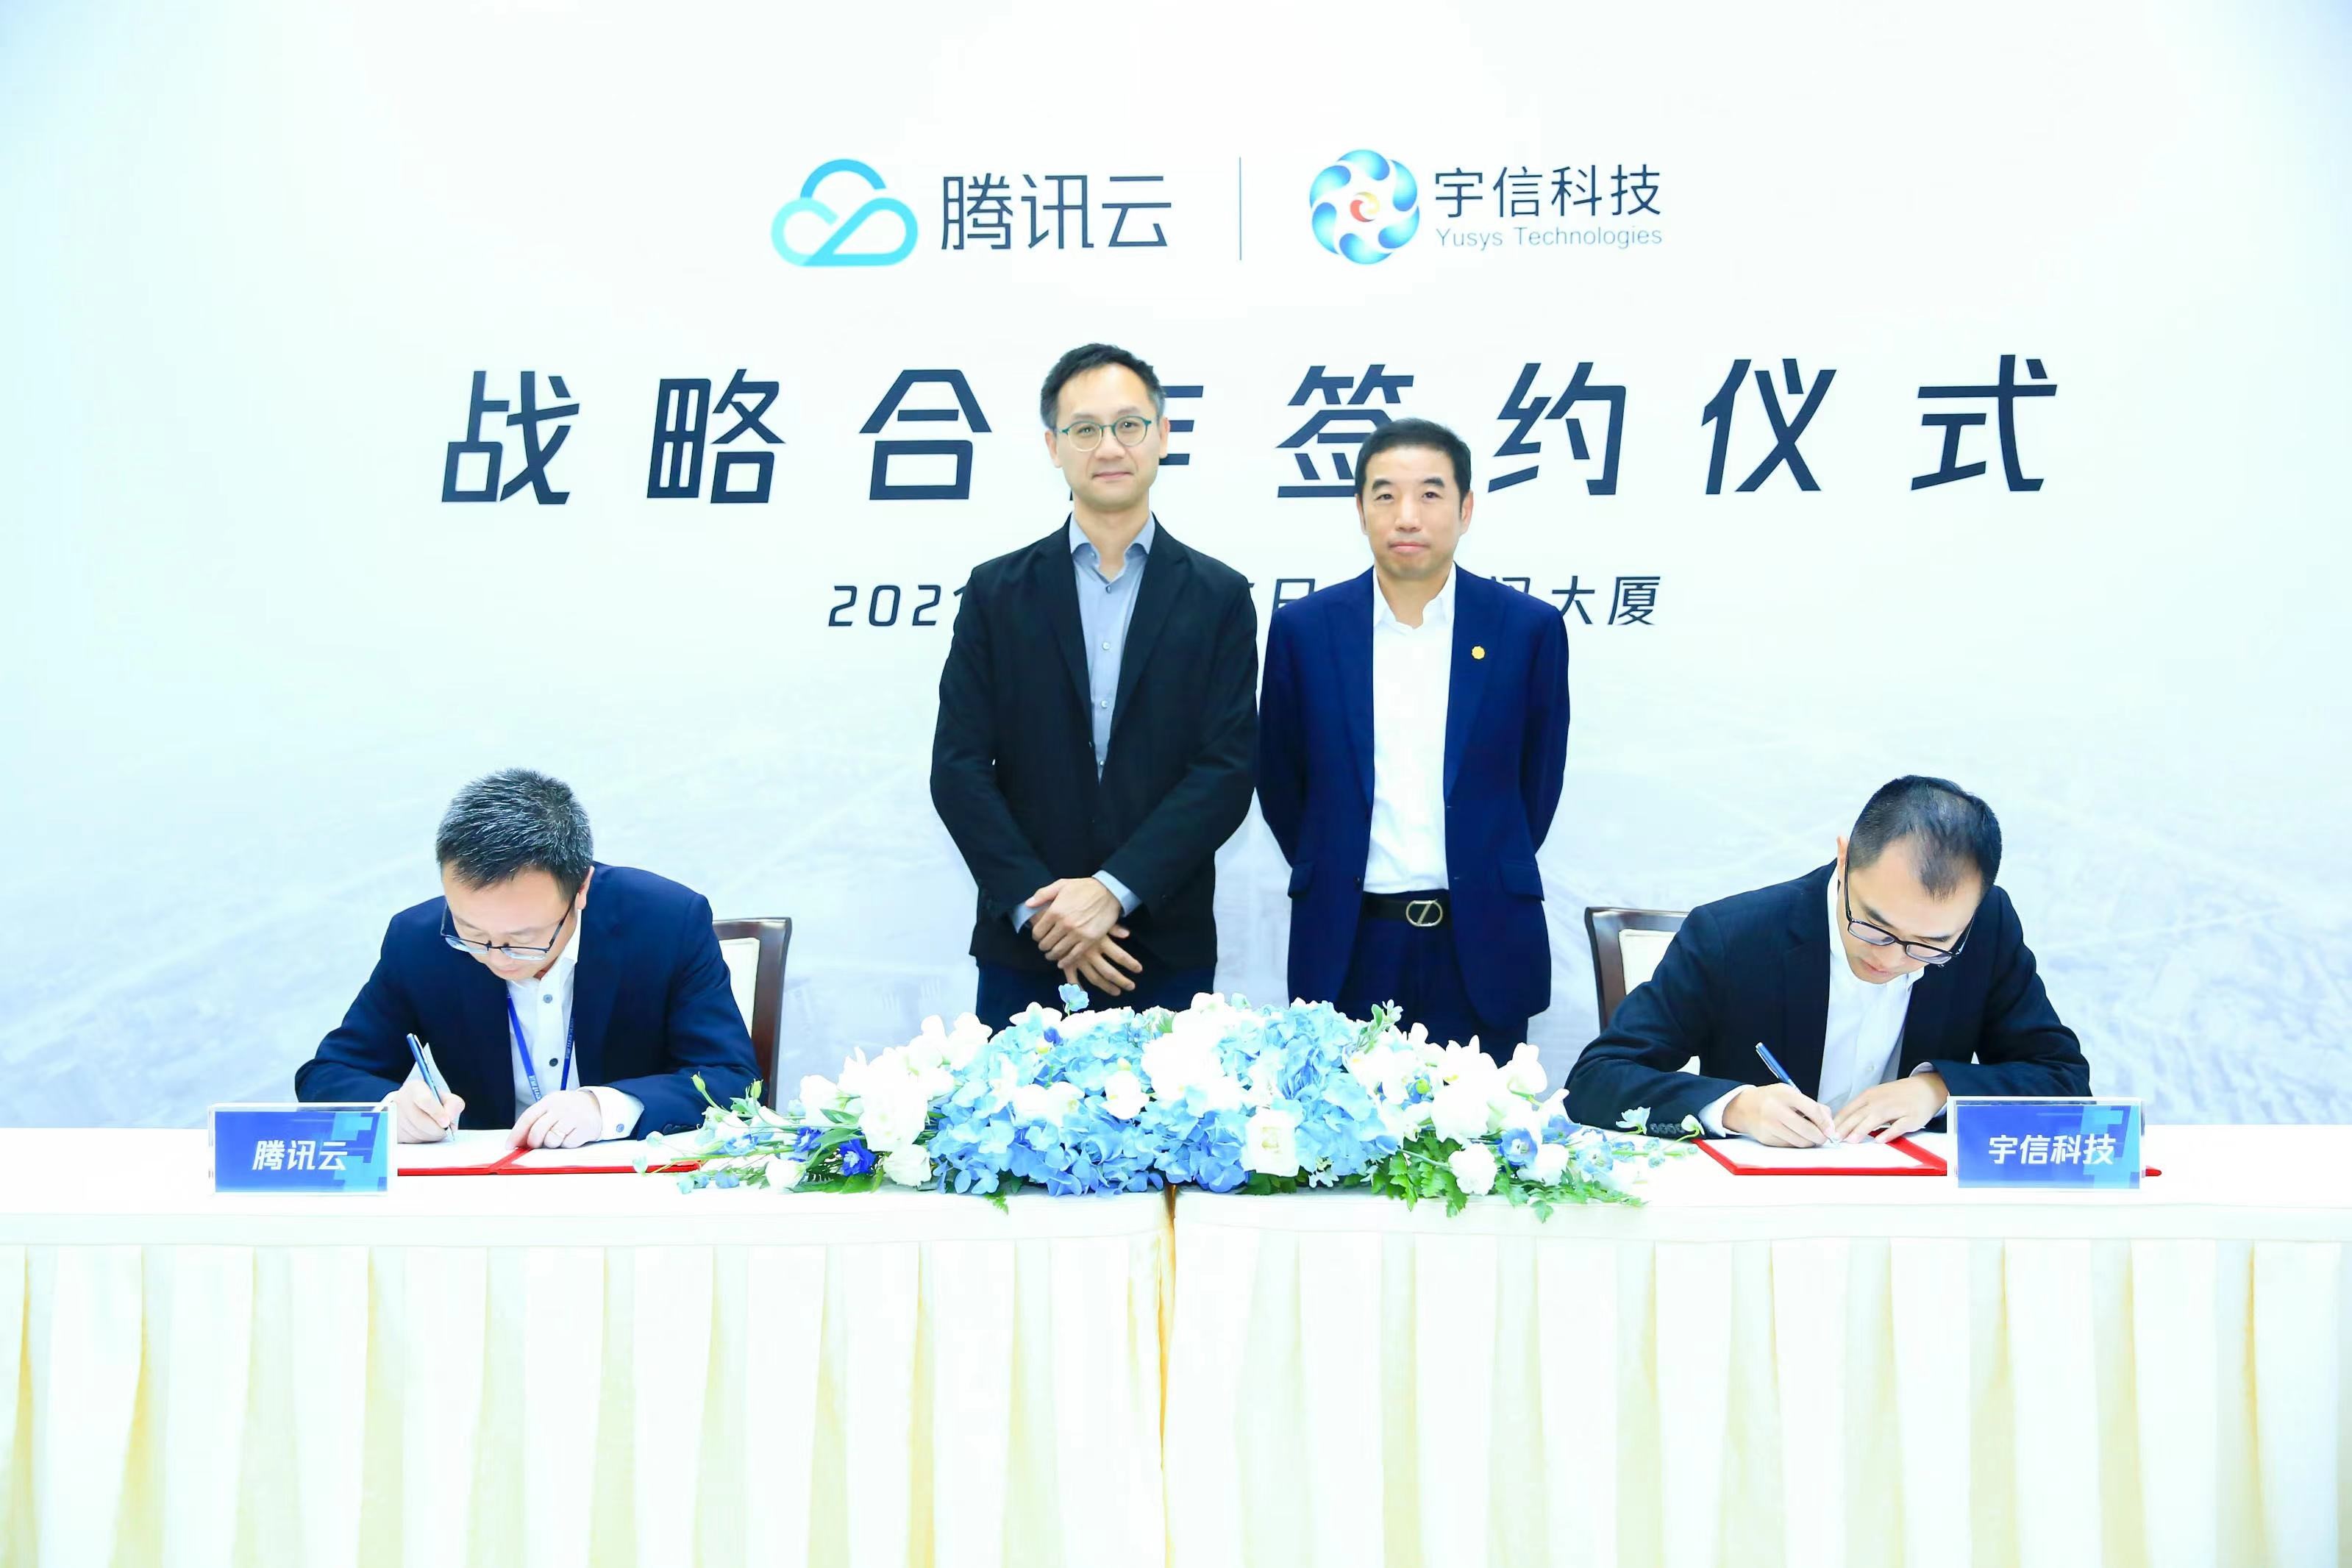 Yusys Technologies and Tencent Cloud Launches Strategic Cooperation to Promote the Development of Financial Technology